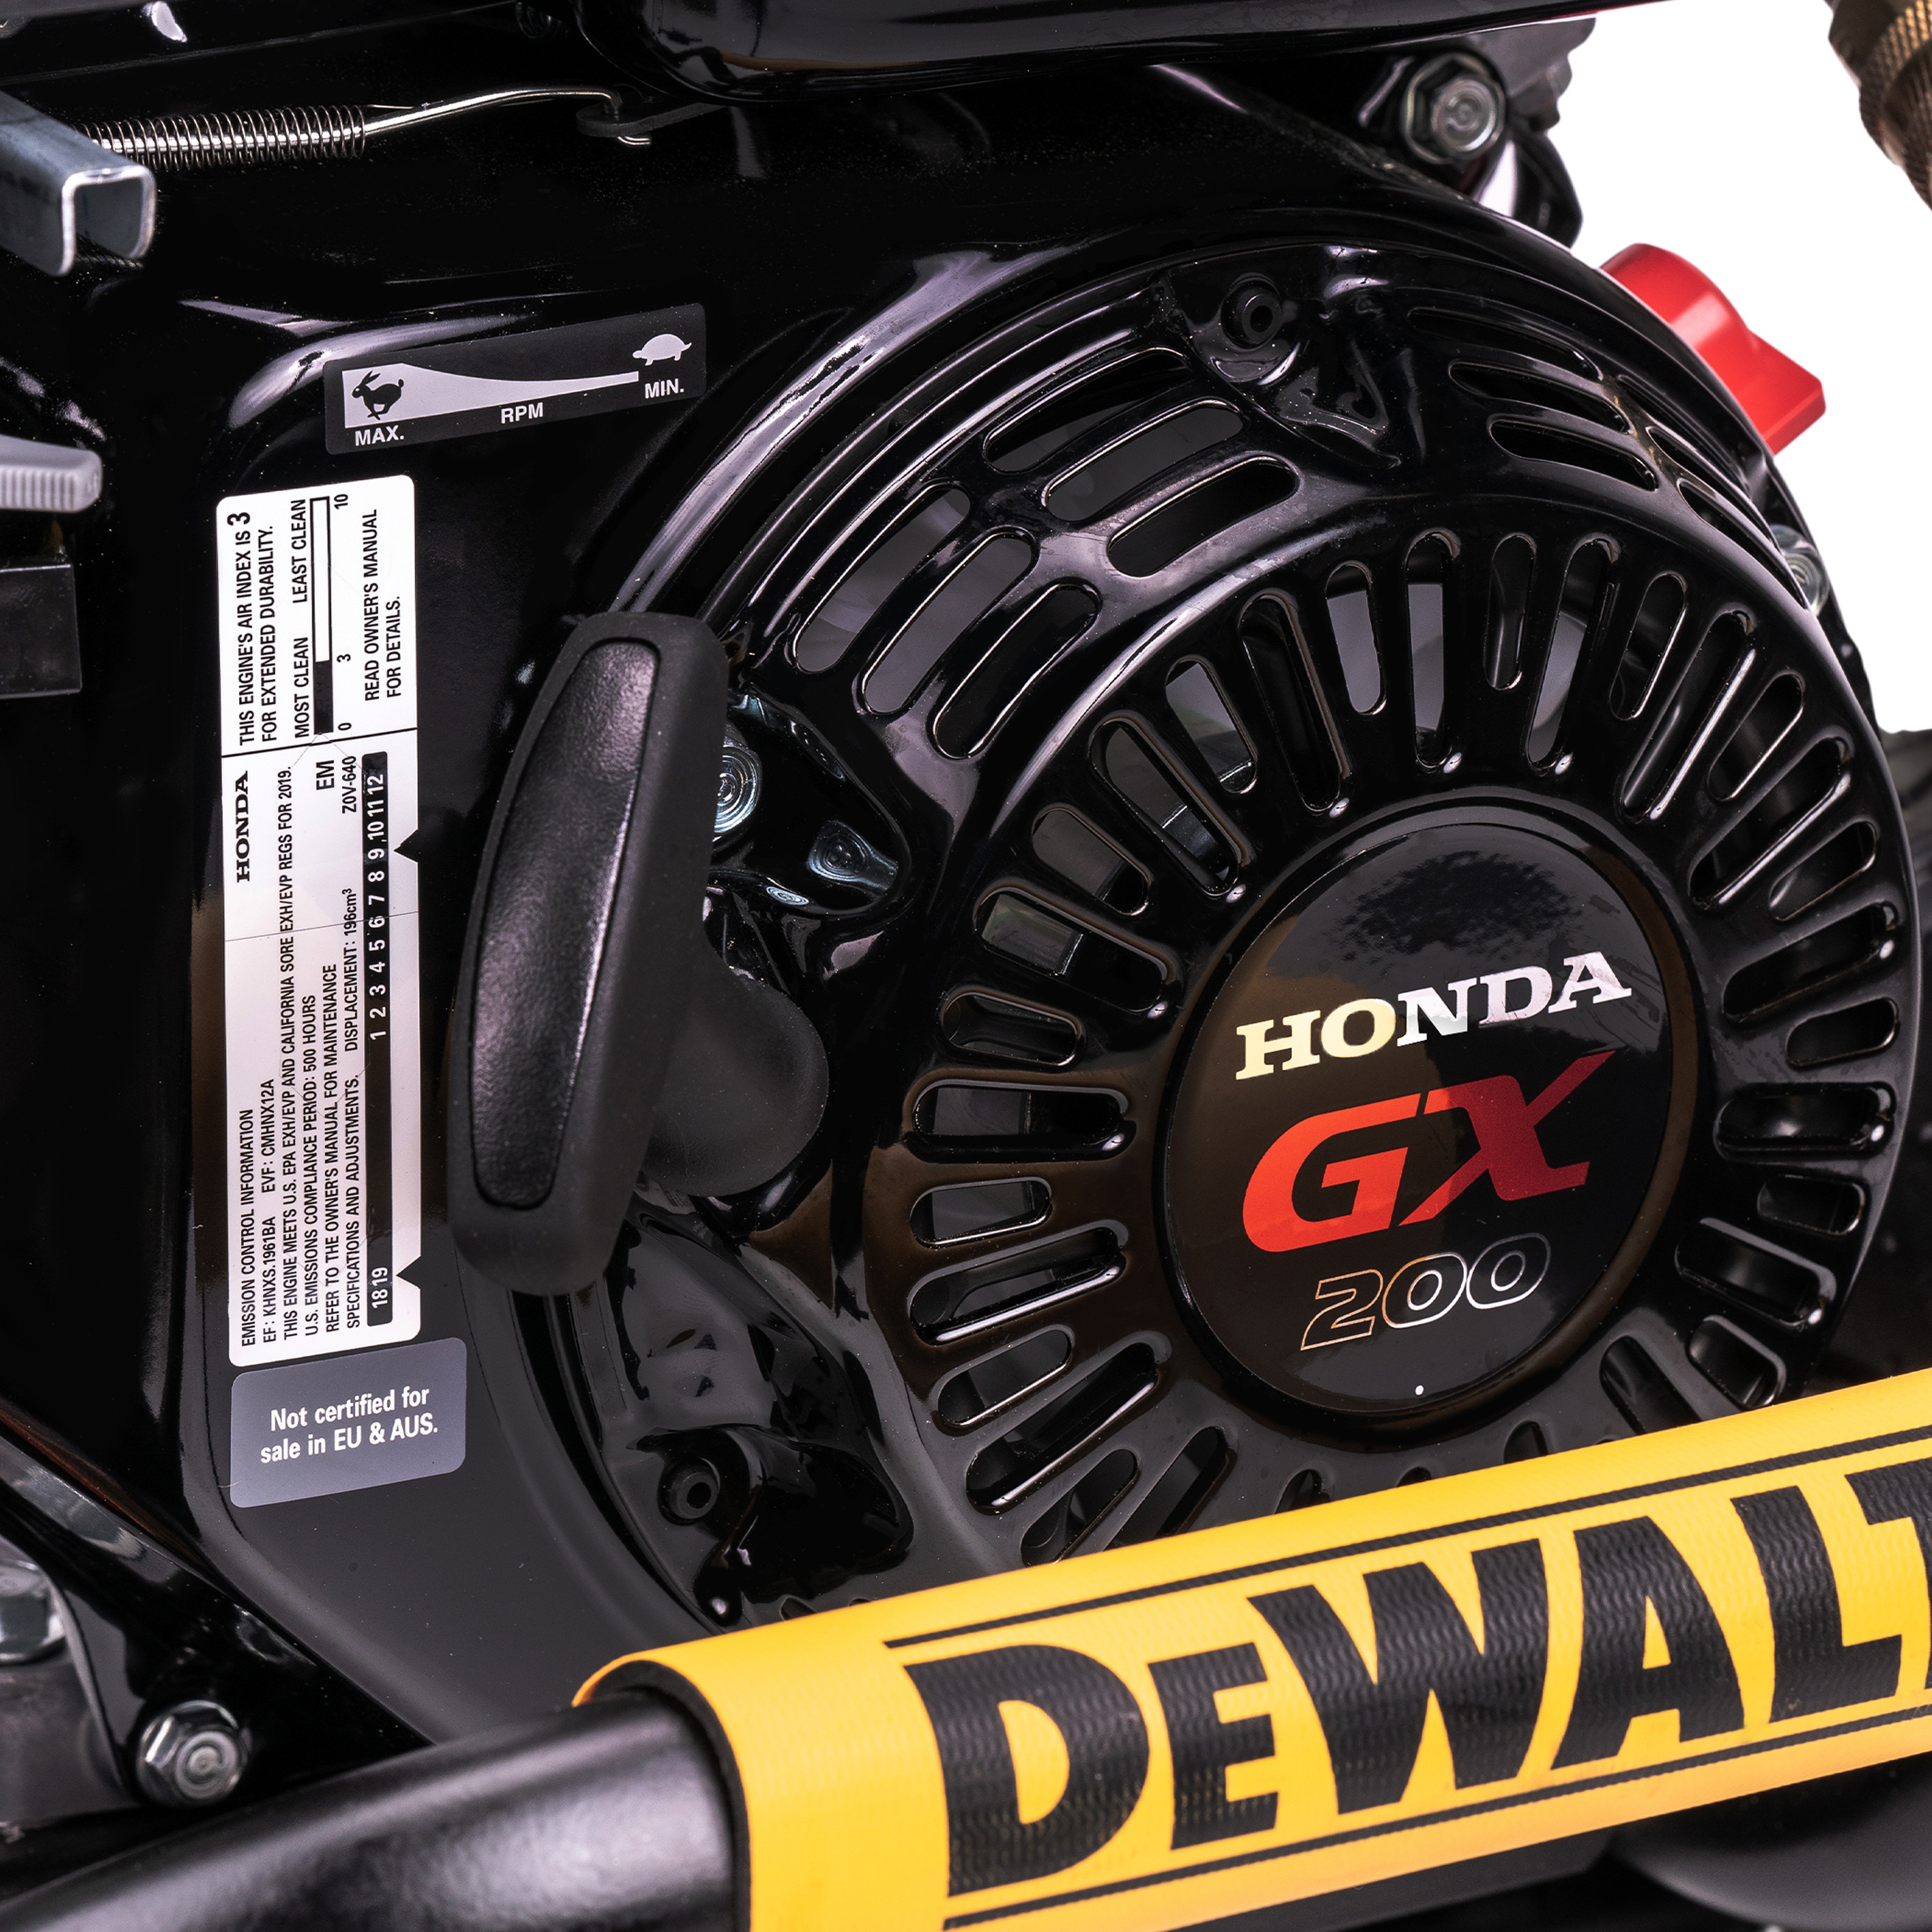 DEWALT - 3600 PSI at 25 GPM Cold Water Gas Pressure Washer Powered by Honda with Triplex Pump - DXPW3625